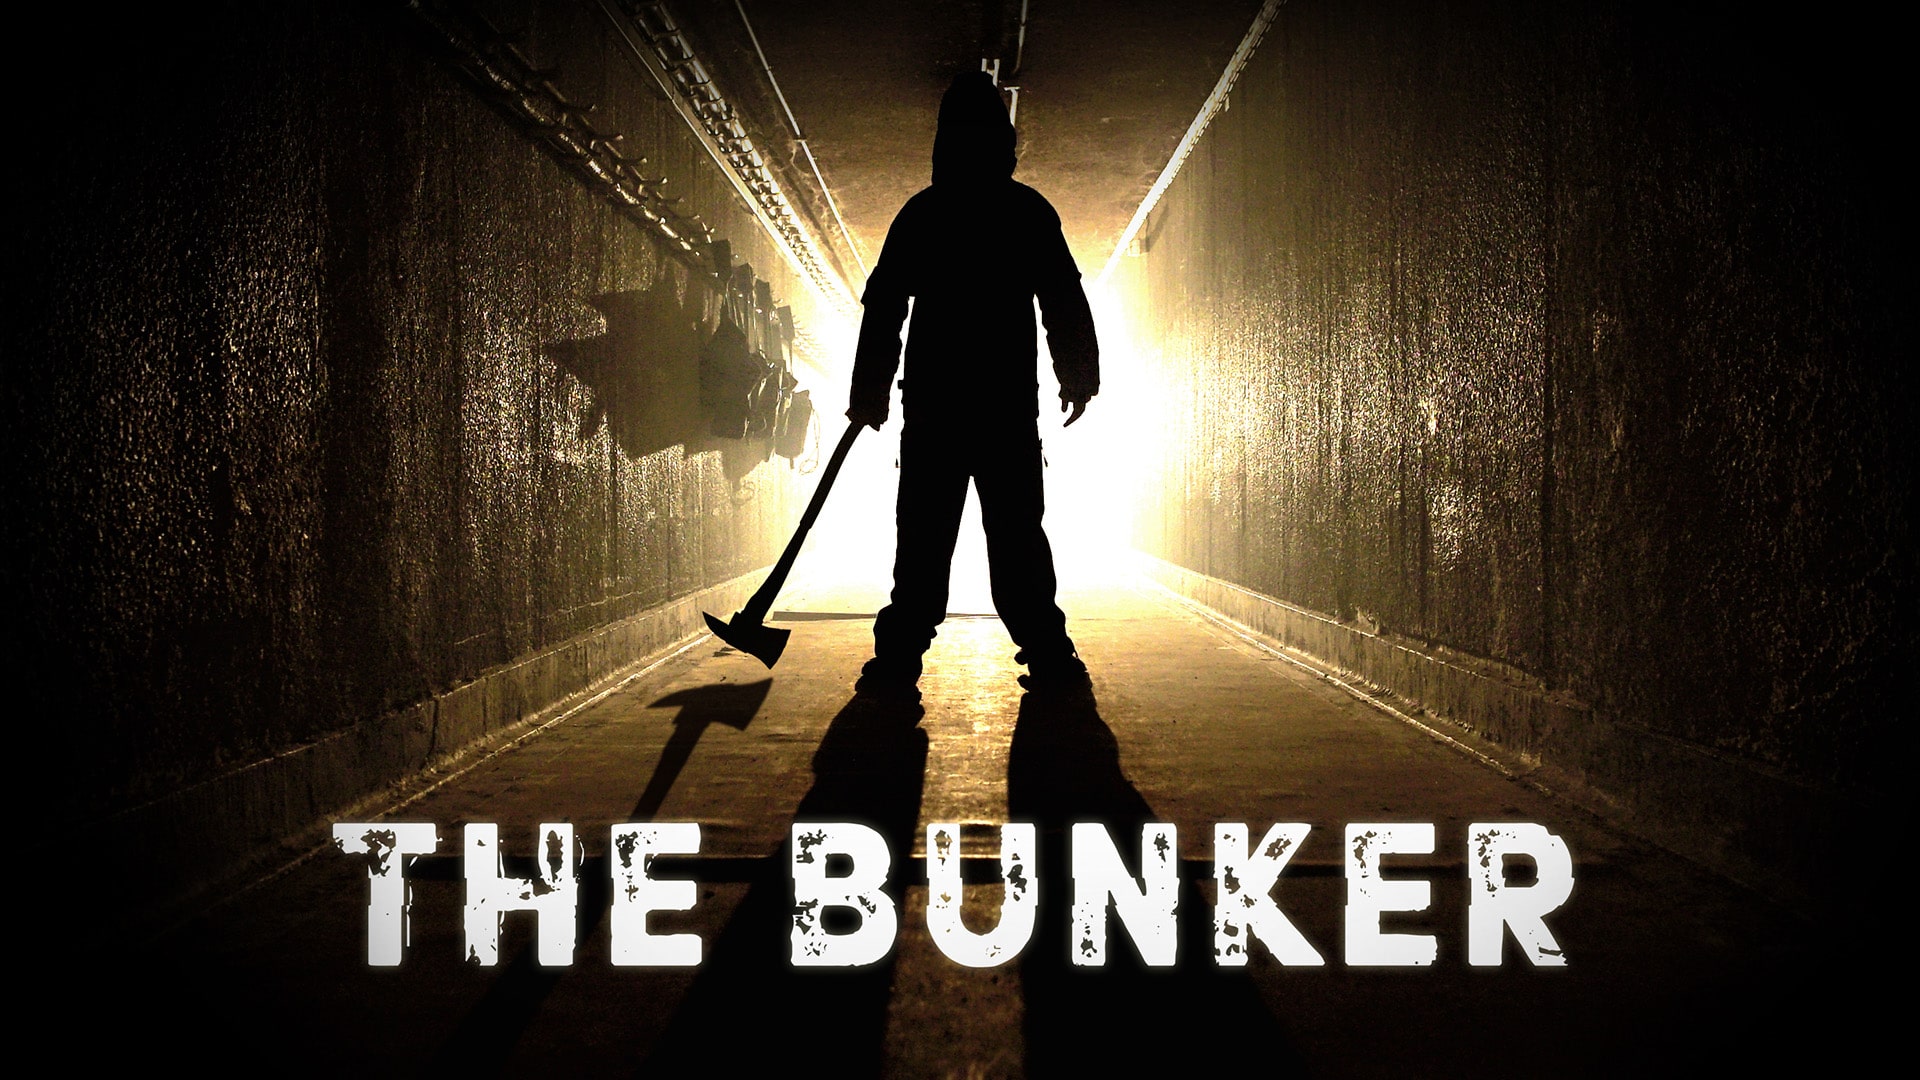 The Bunker launch trailer